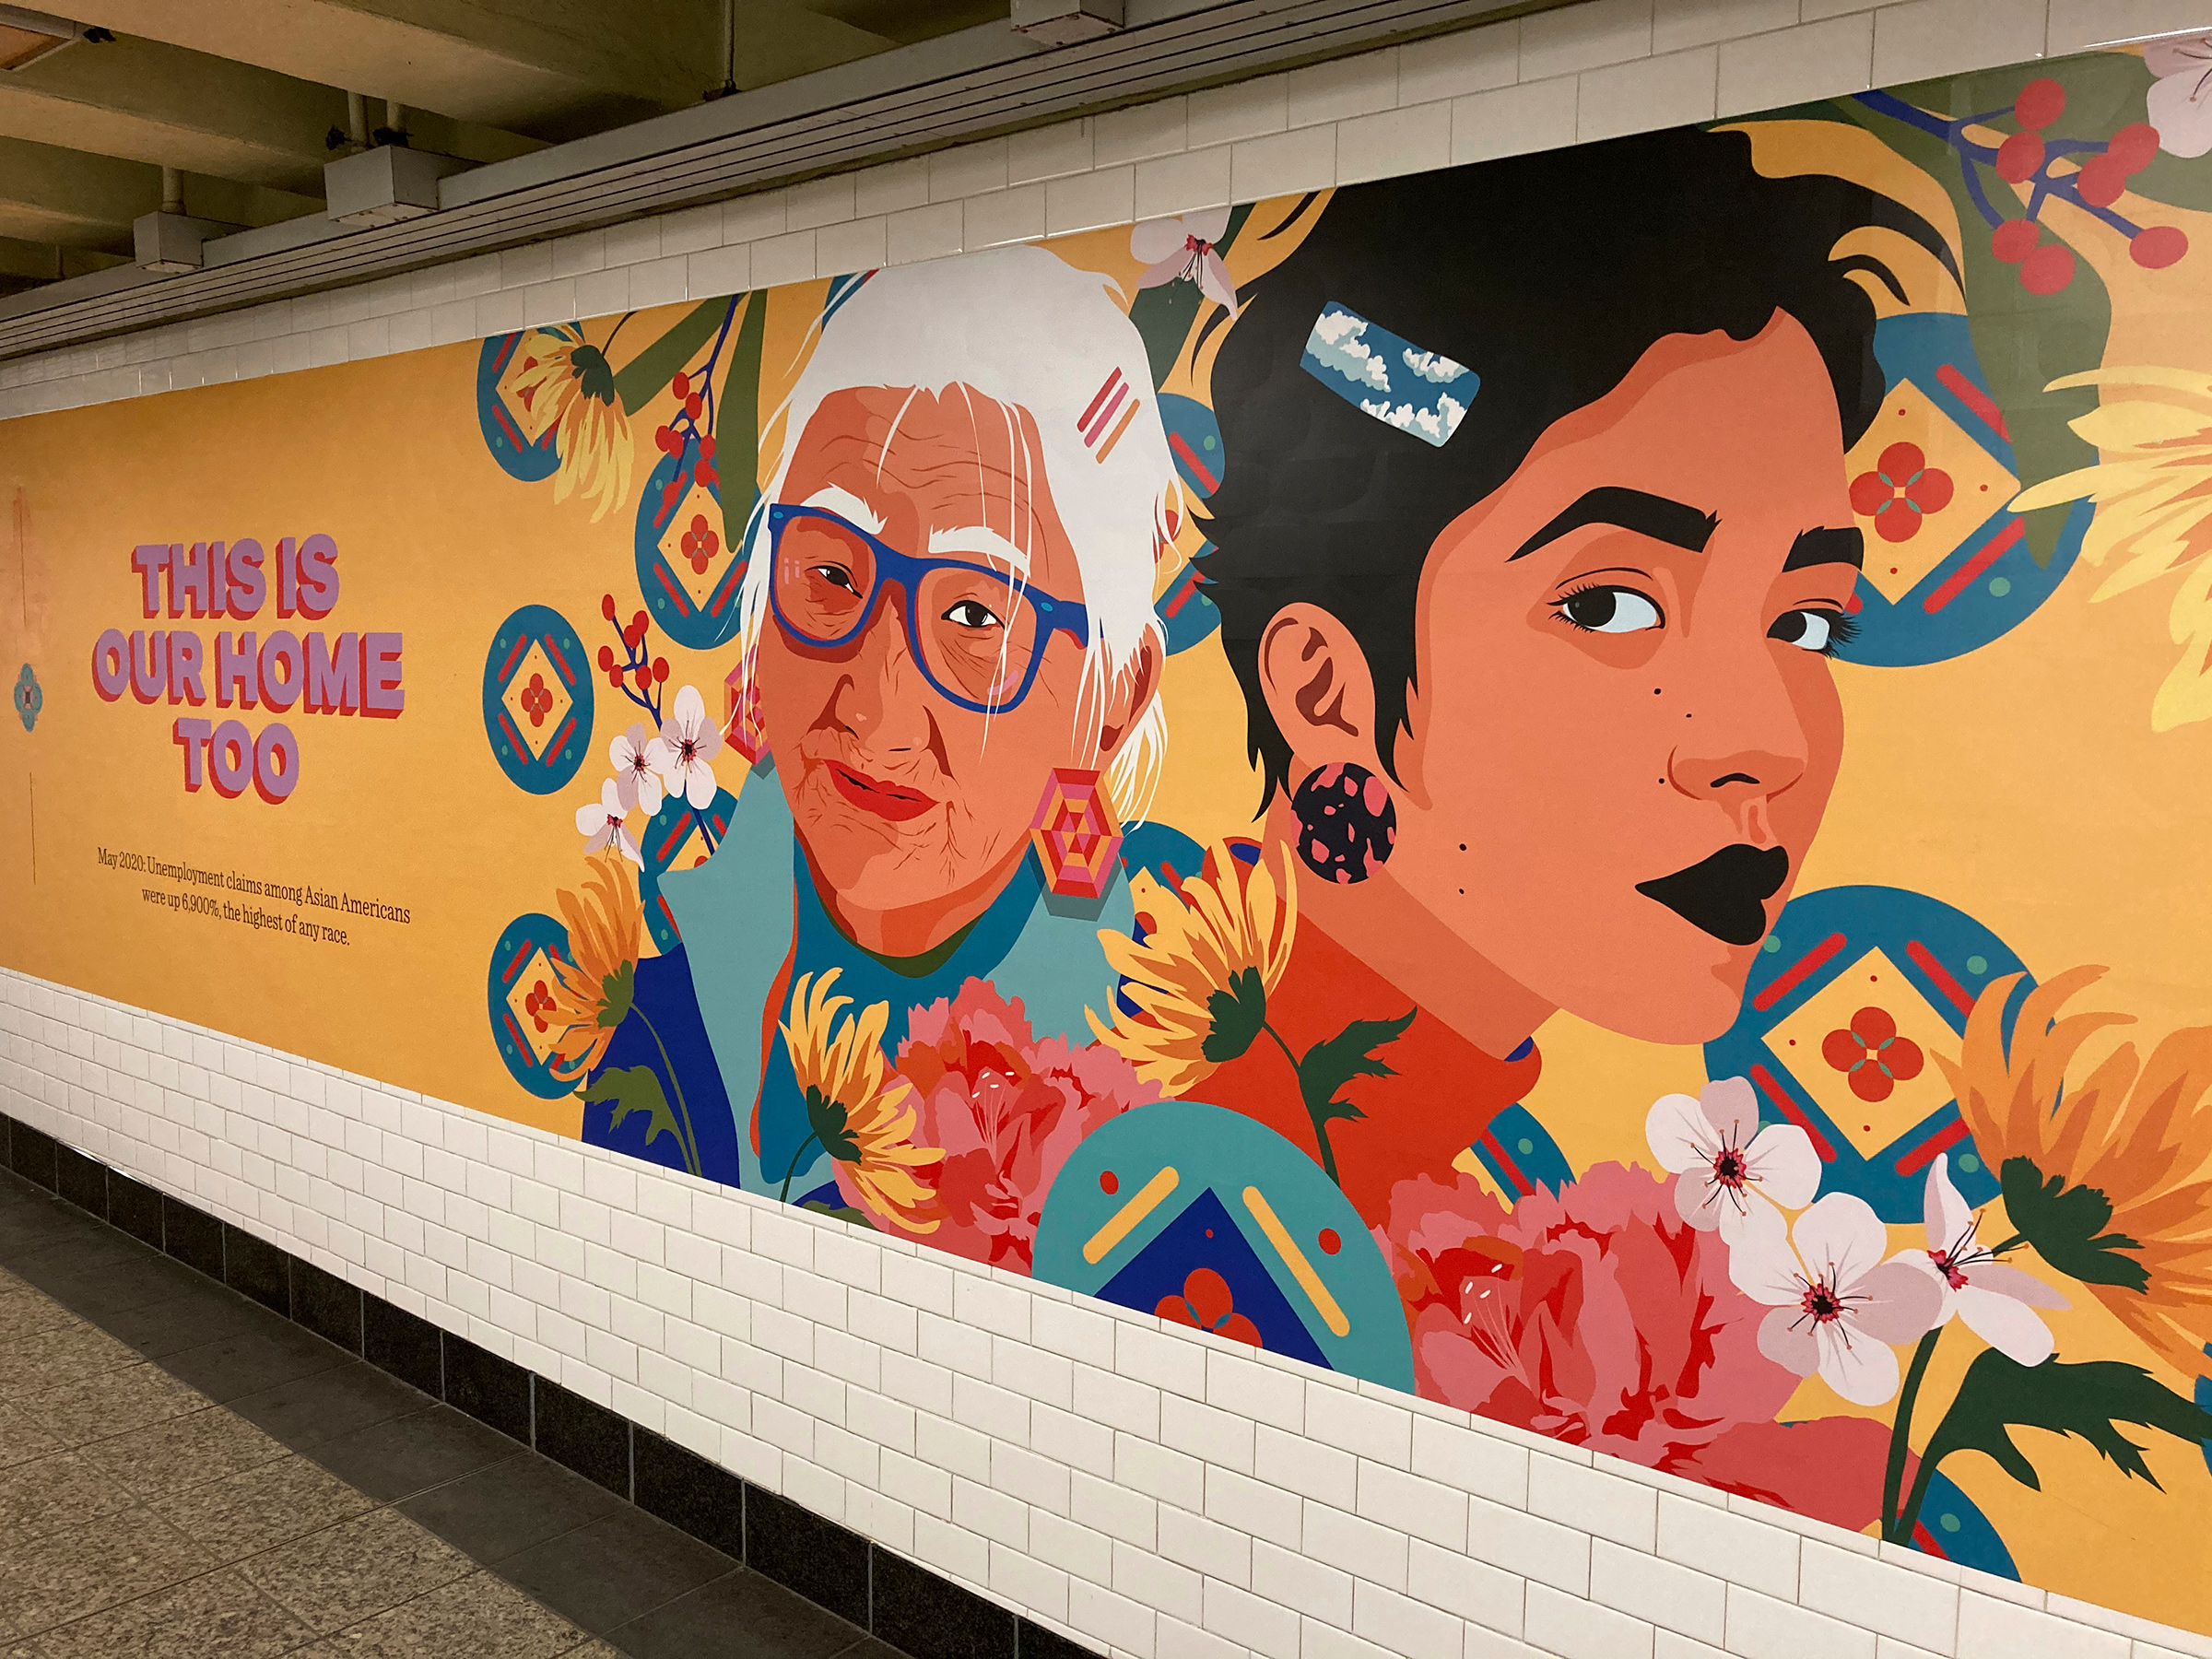 Posters against racism towards Asian Americans, by artist Amanda Phingbodhipakkiya, are seen at the subway station at Barclays Center in Brooklyn, Jan. 1 (STRF/STAR MAX/IPx)